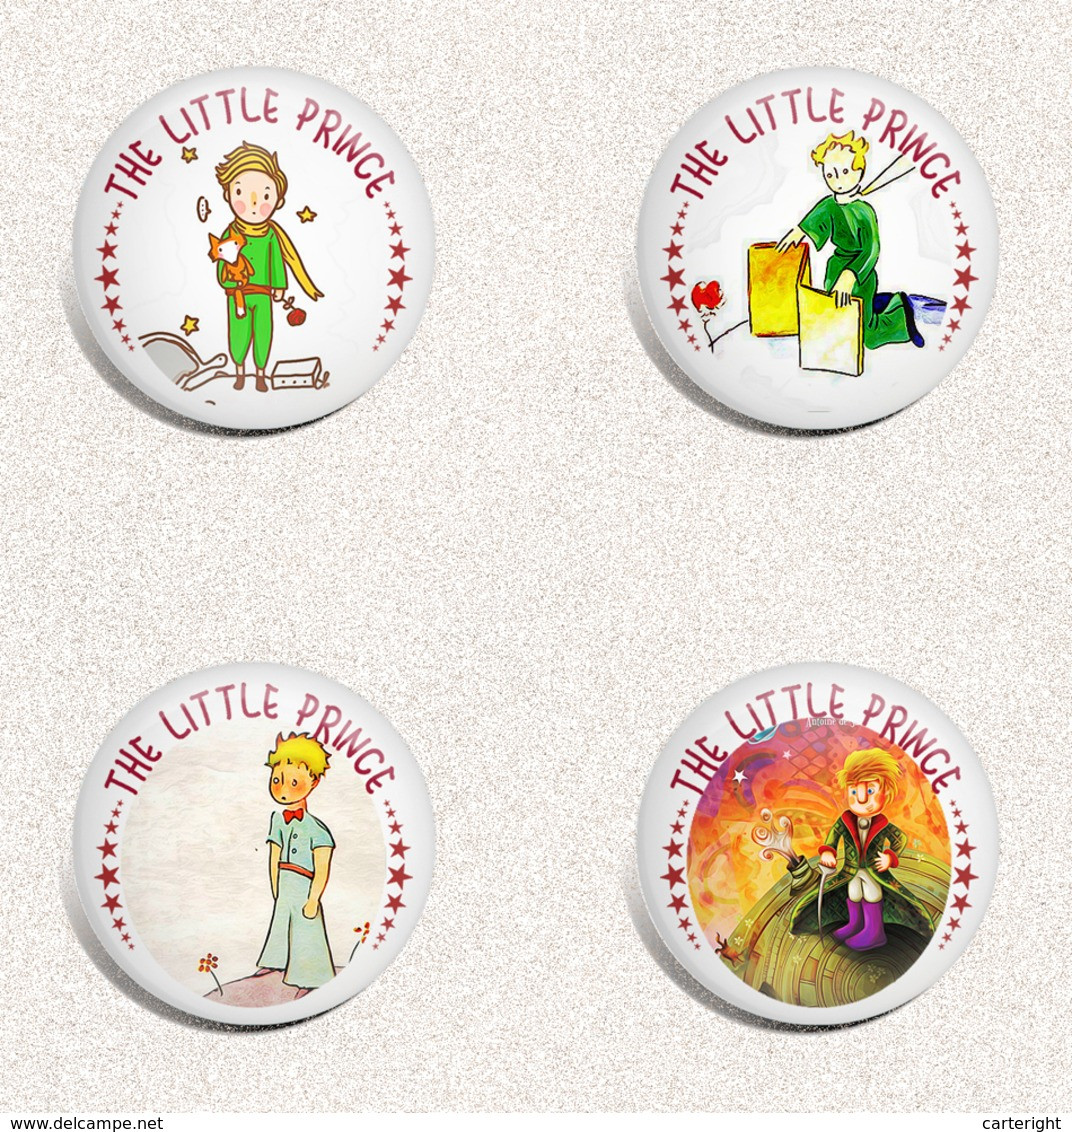 140 x THE LITTLE PRINCE BADGE BUTTON PIN SET (1inch/25mm diameter)